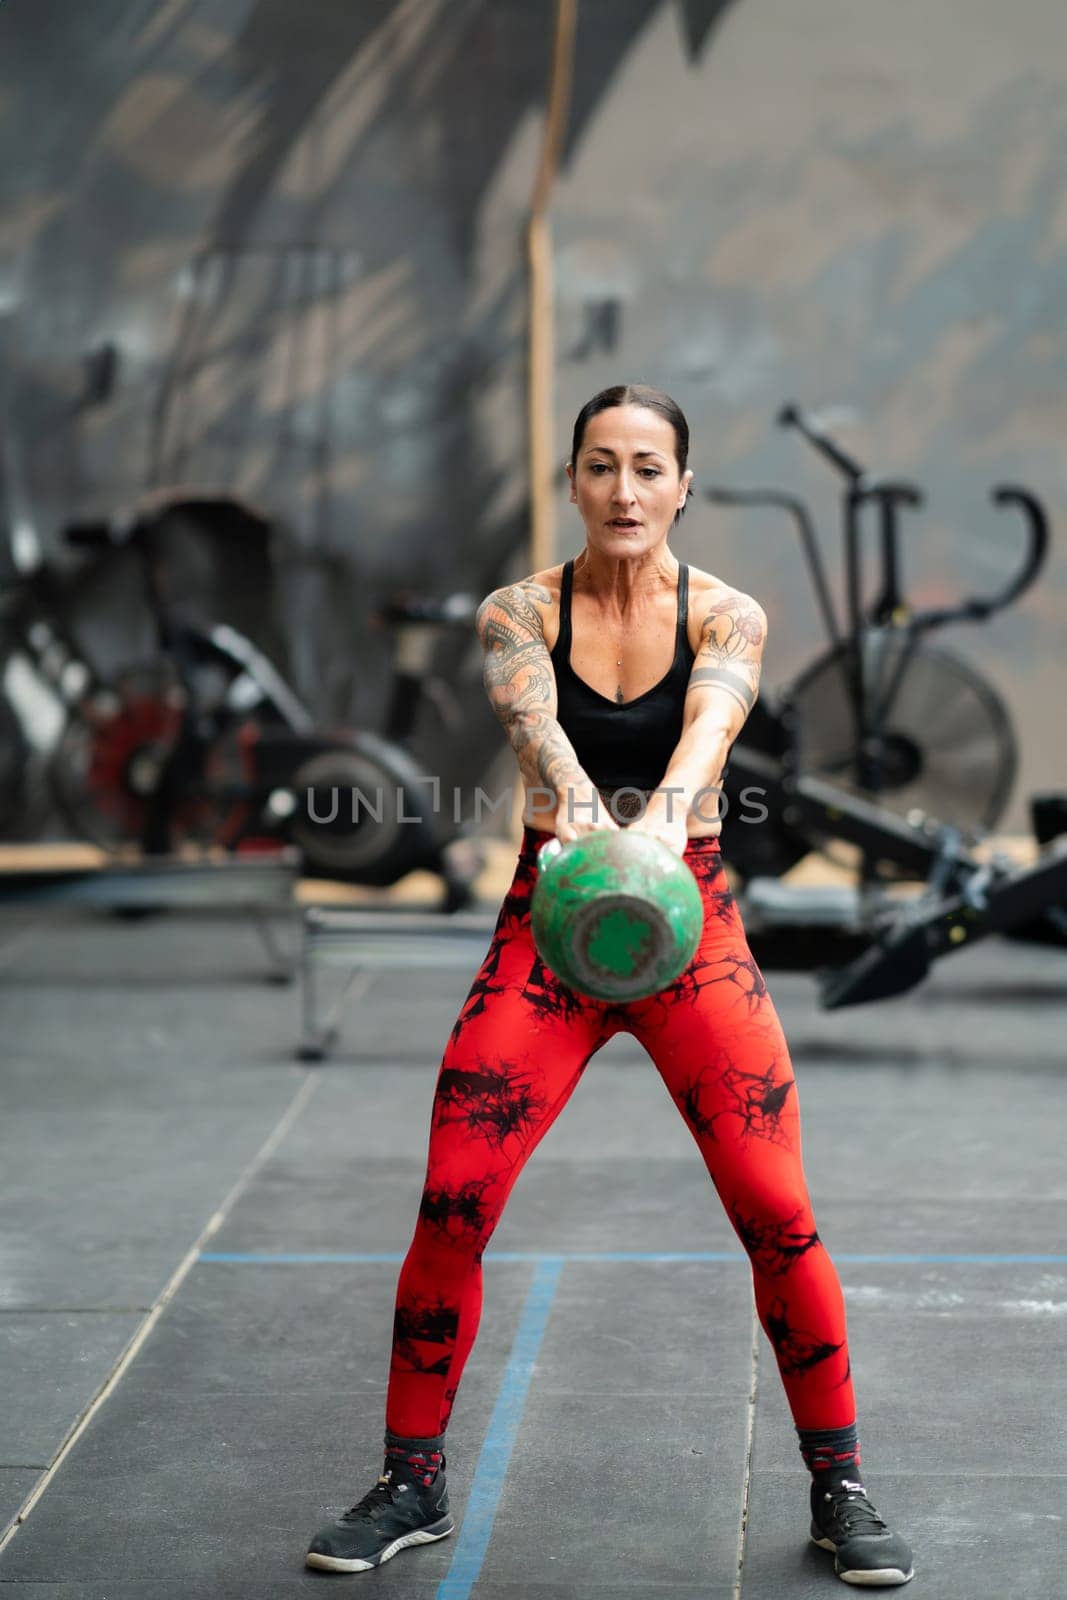 Vertical photo of a mature sportive woman performing kettlebell swing exercise in a gym